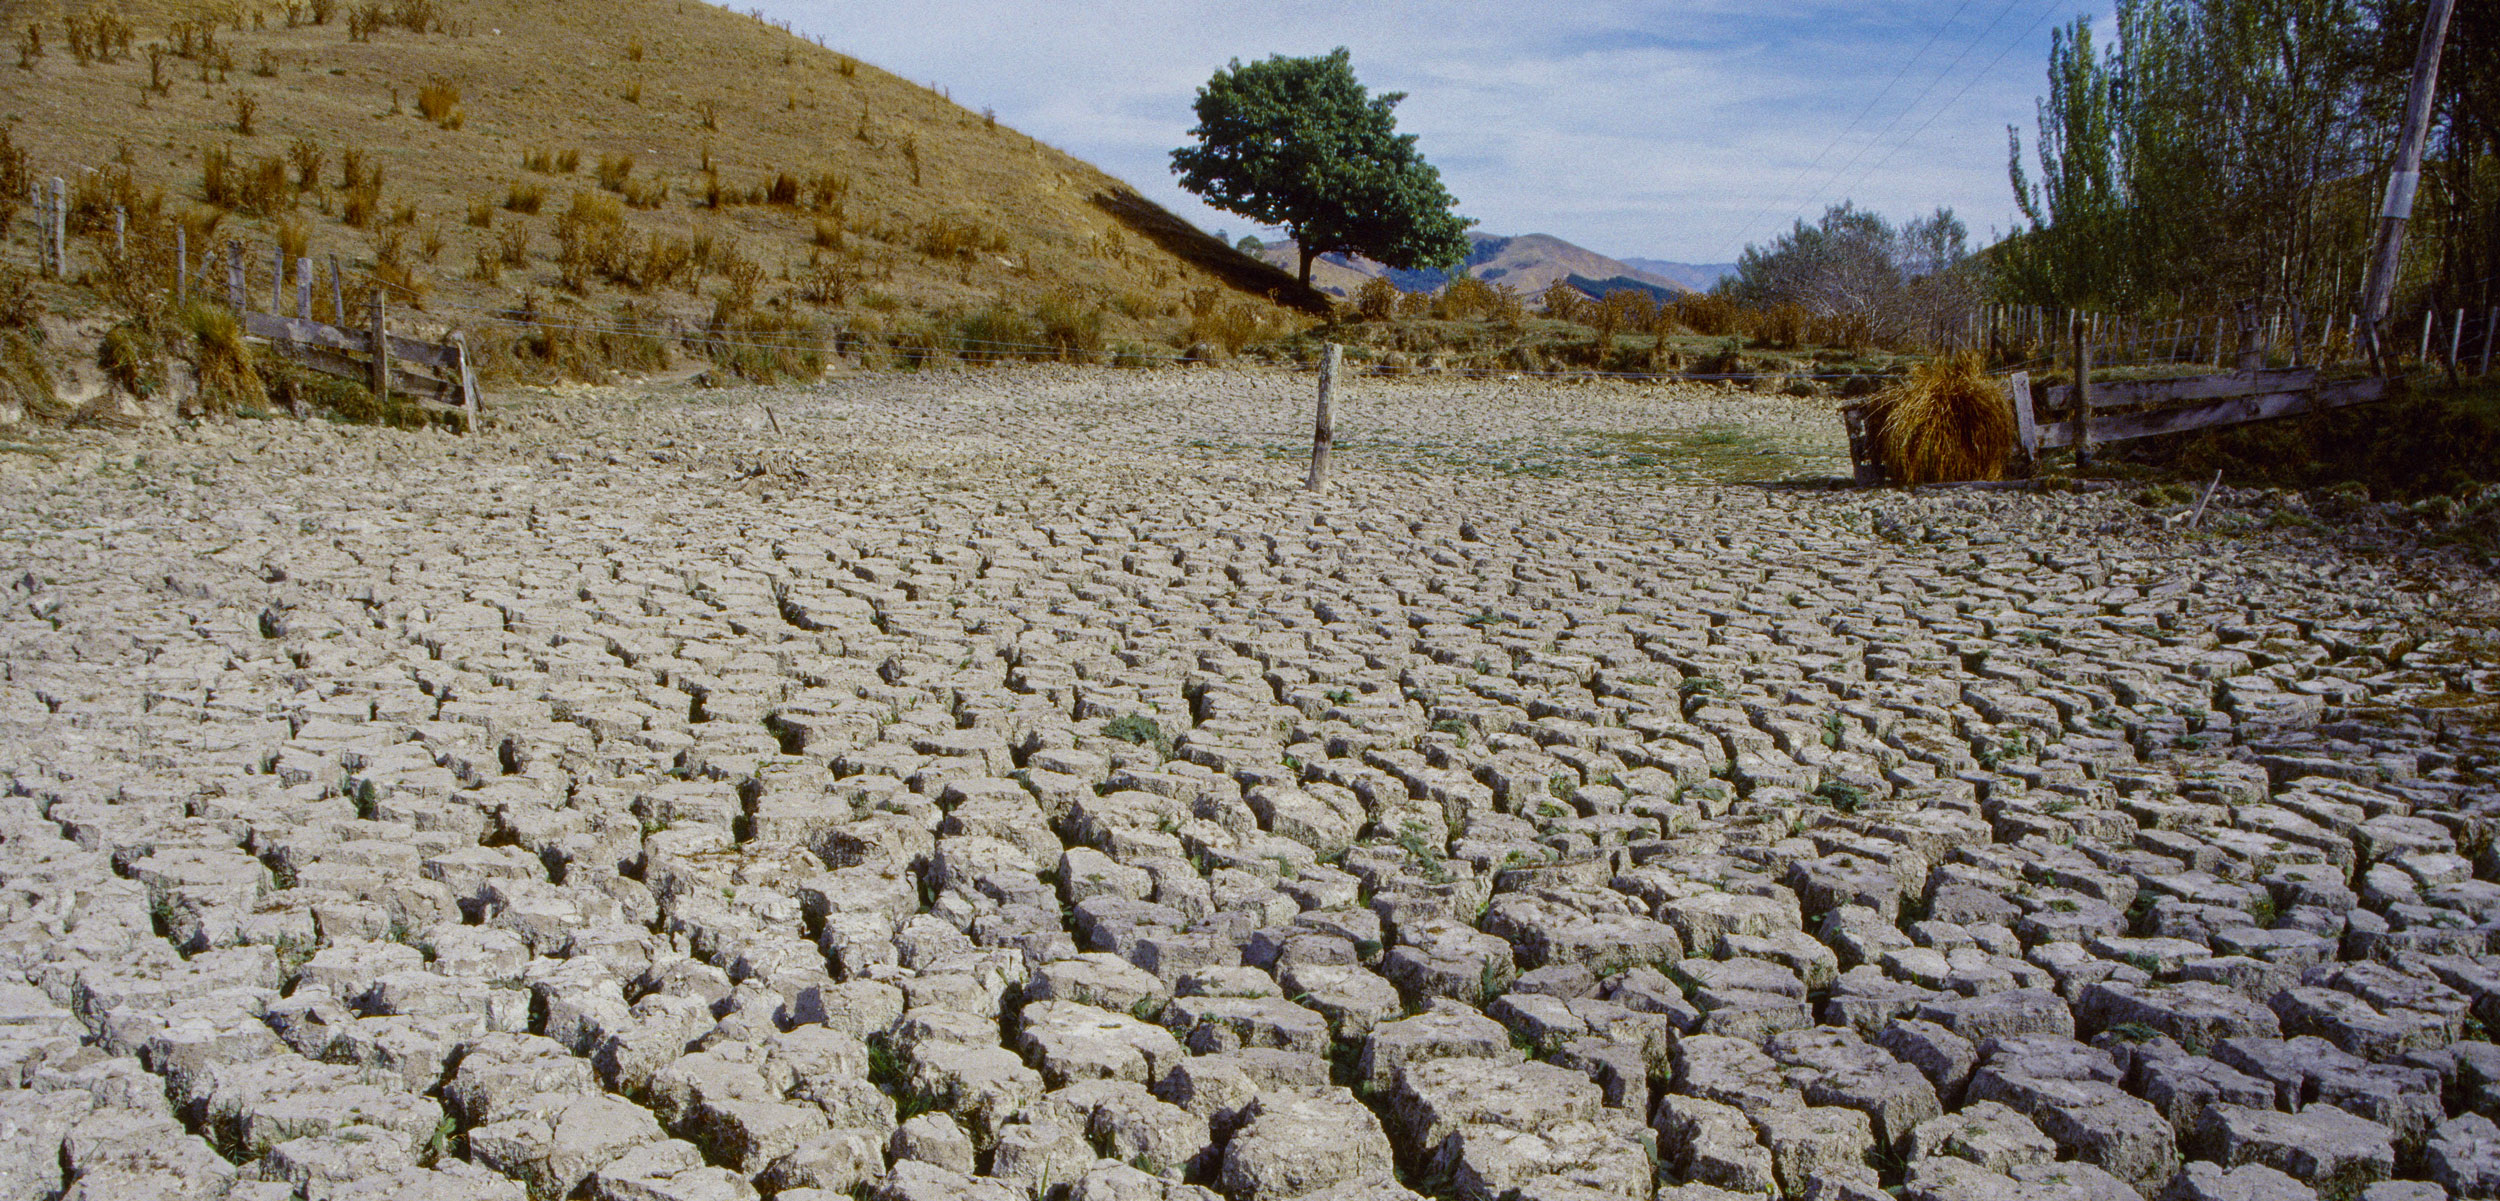 Dry stock pond resulting from 1998 El Nino drought Gisborne, New Zealand